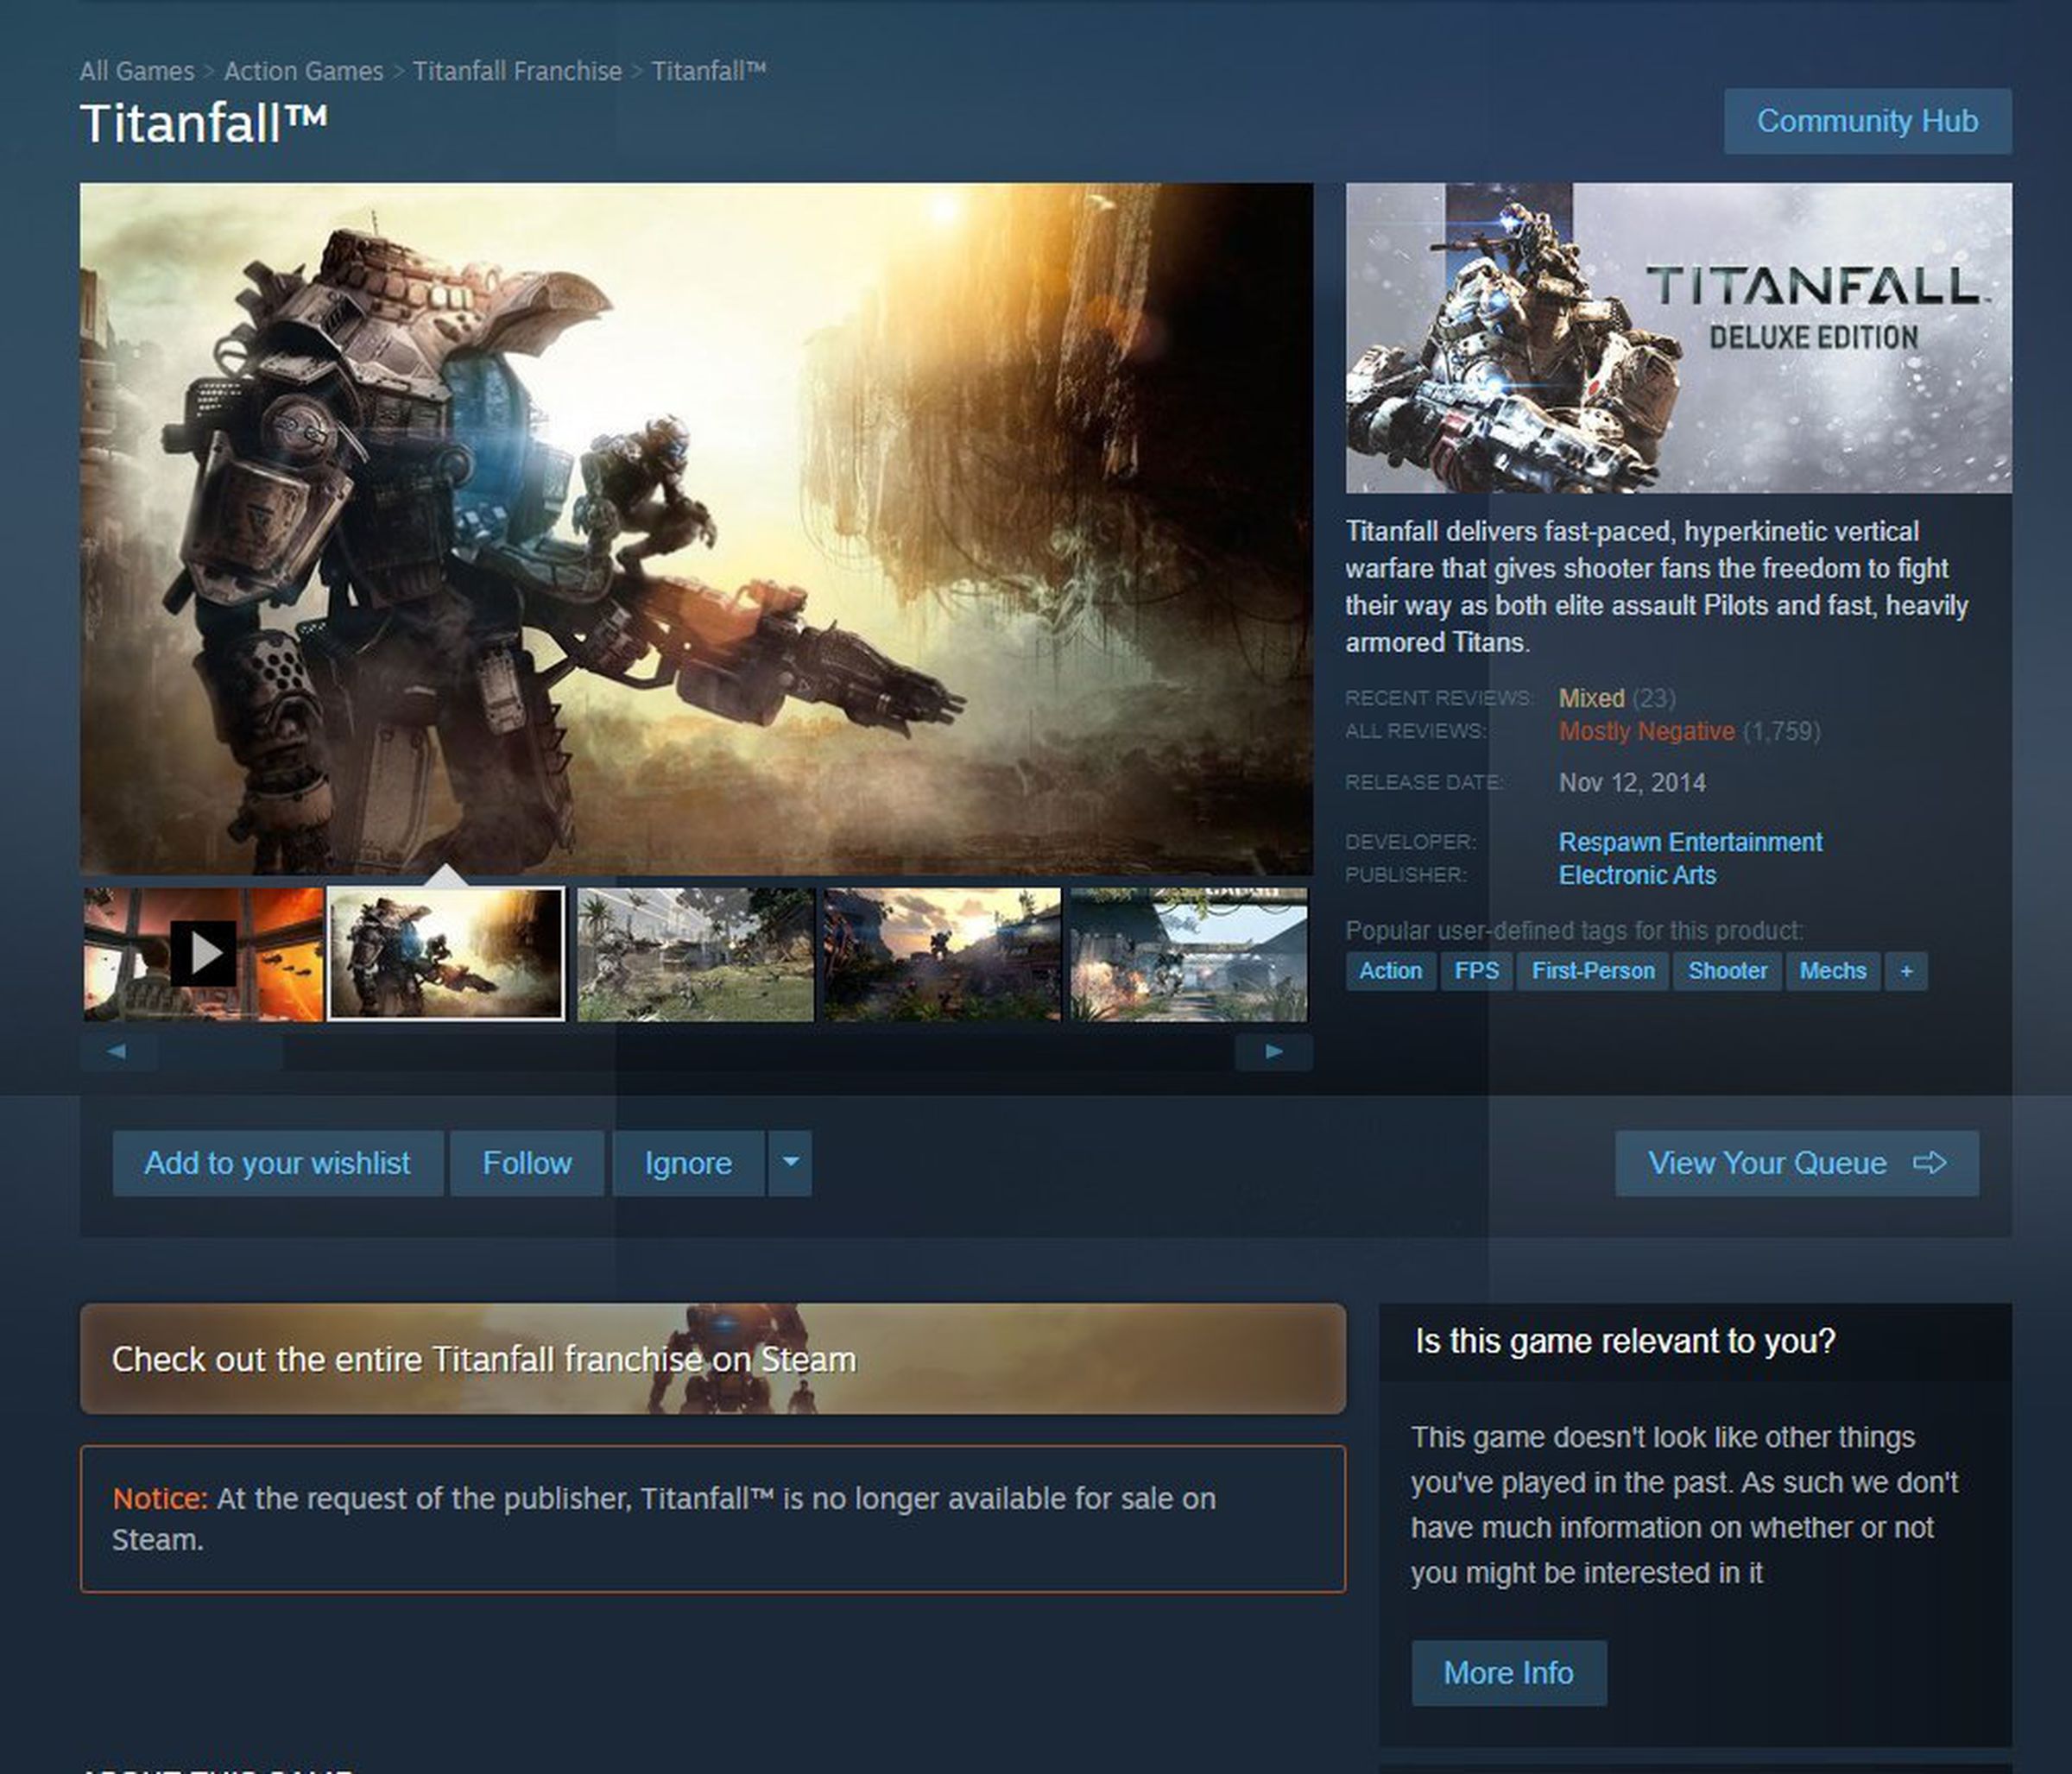 Titanfall is no long available on Steam